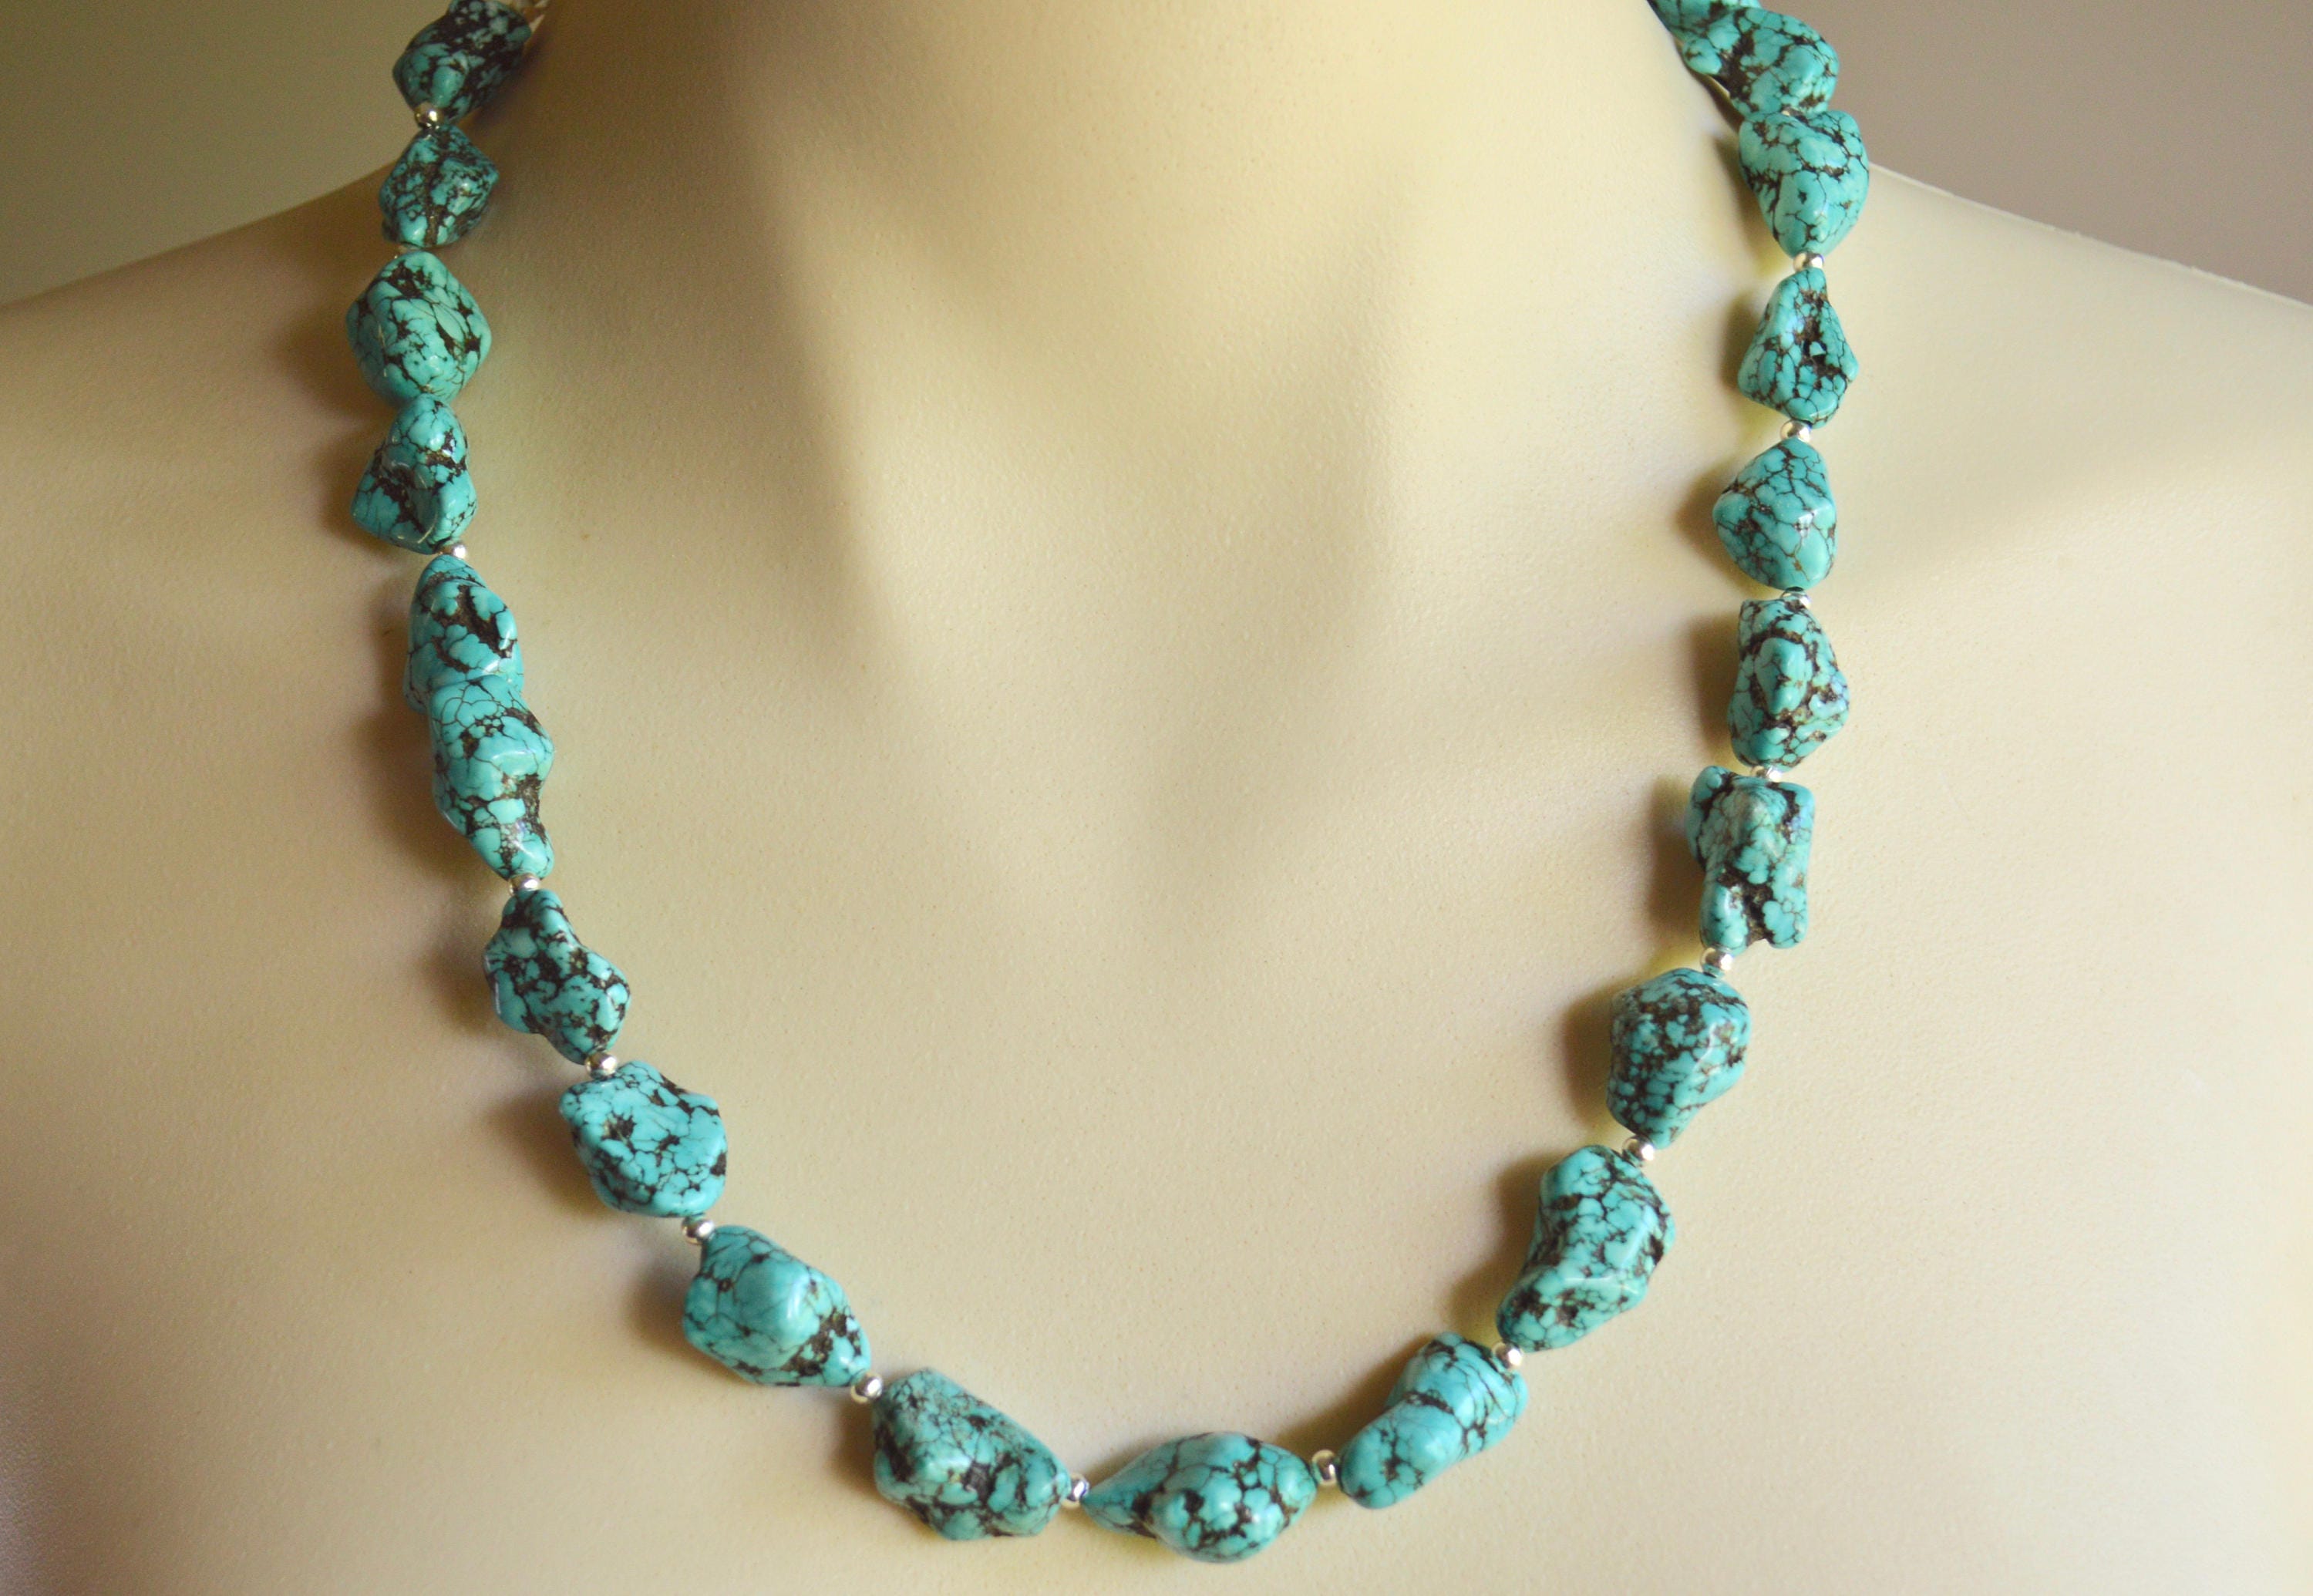 Megan Chunky Turquoise Necklace Megan Fox necklace turquoise